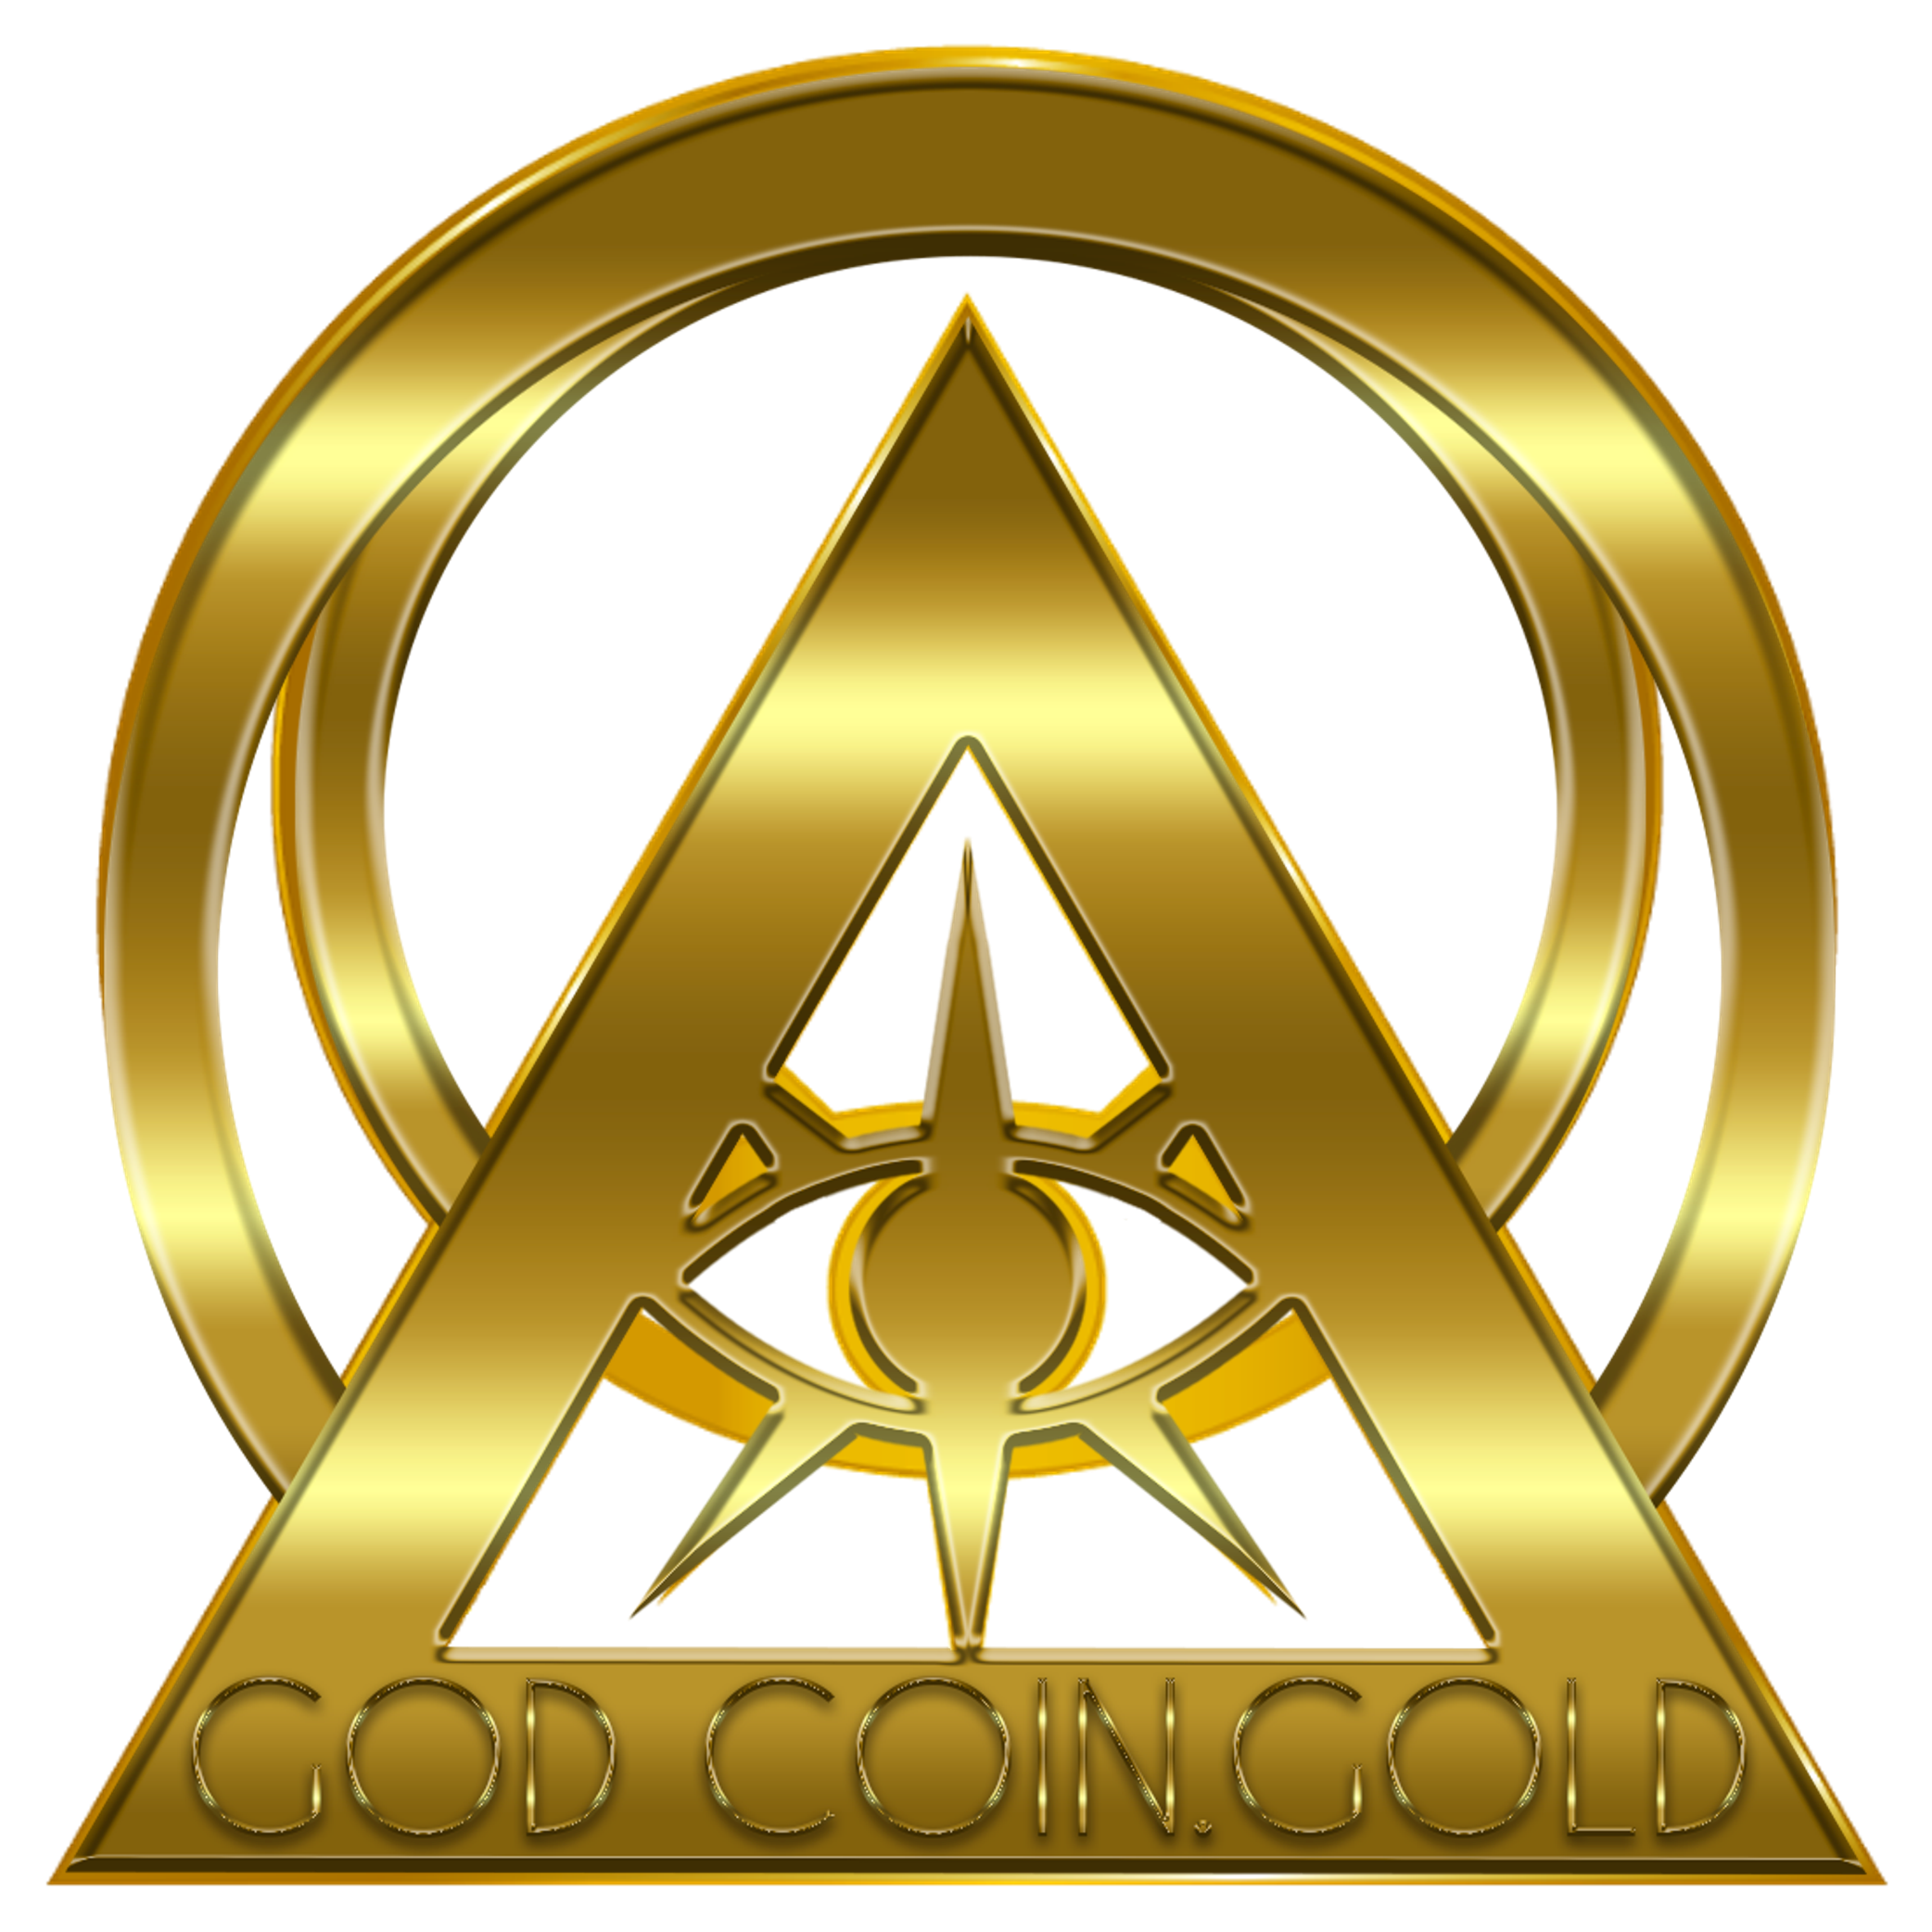 New Religious Crypto-Currency, "GodCoin" Designed to Be ...